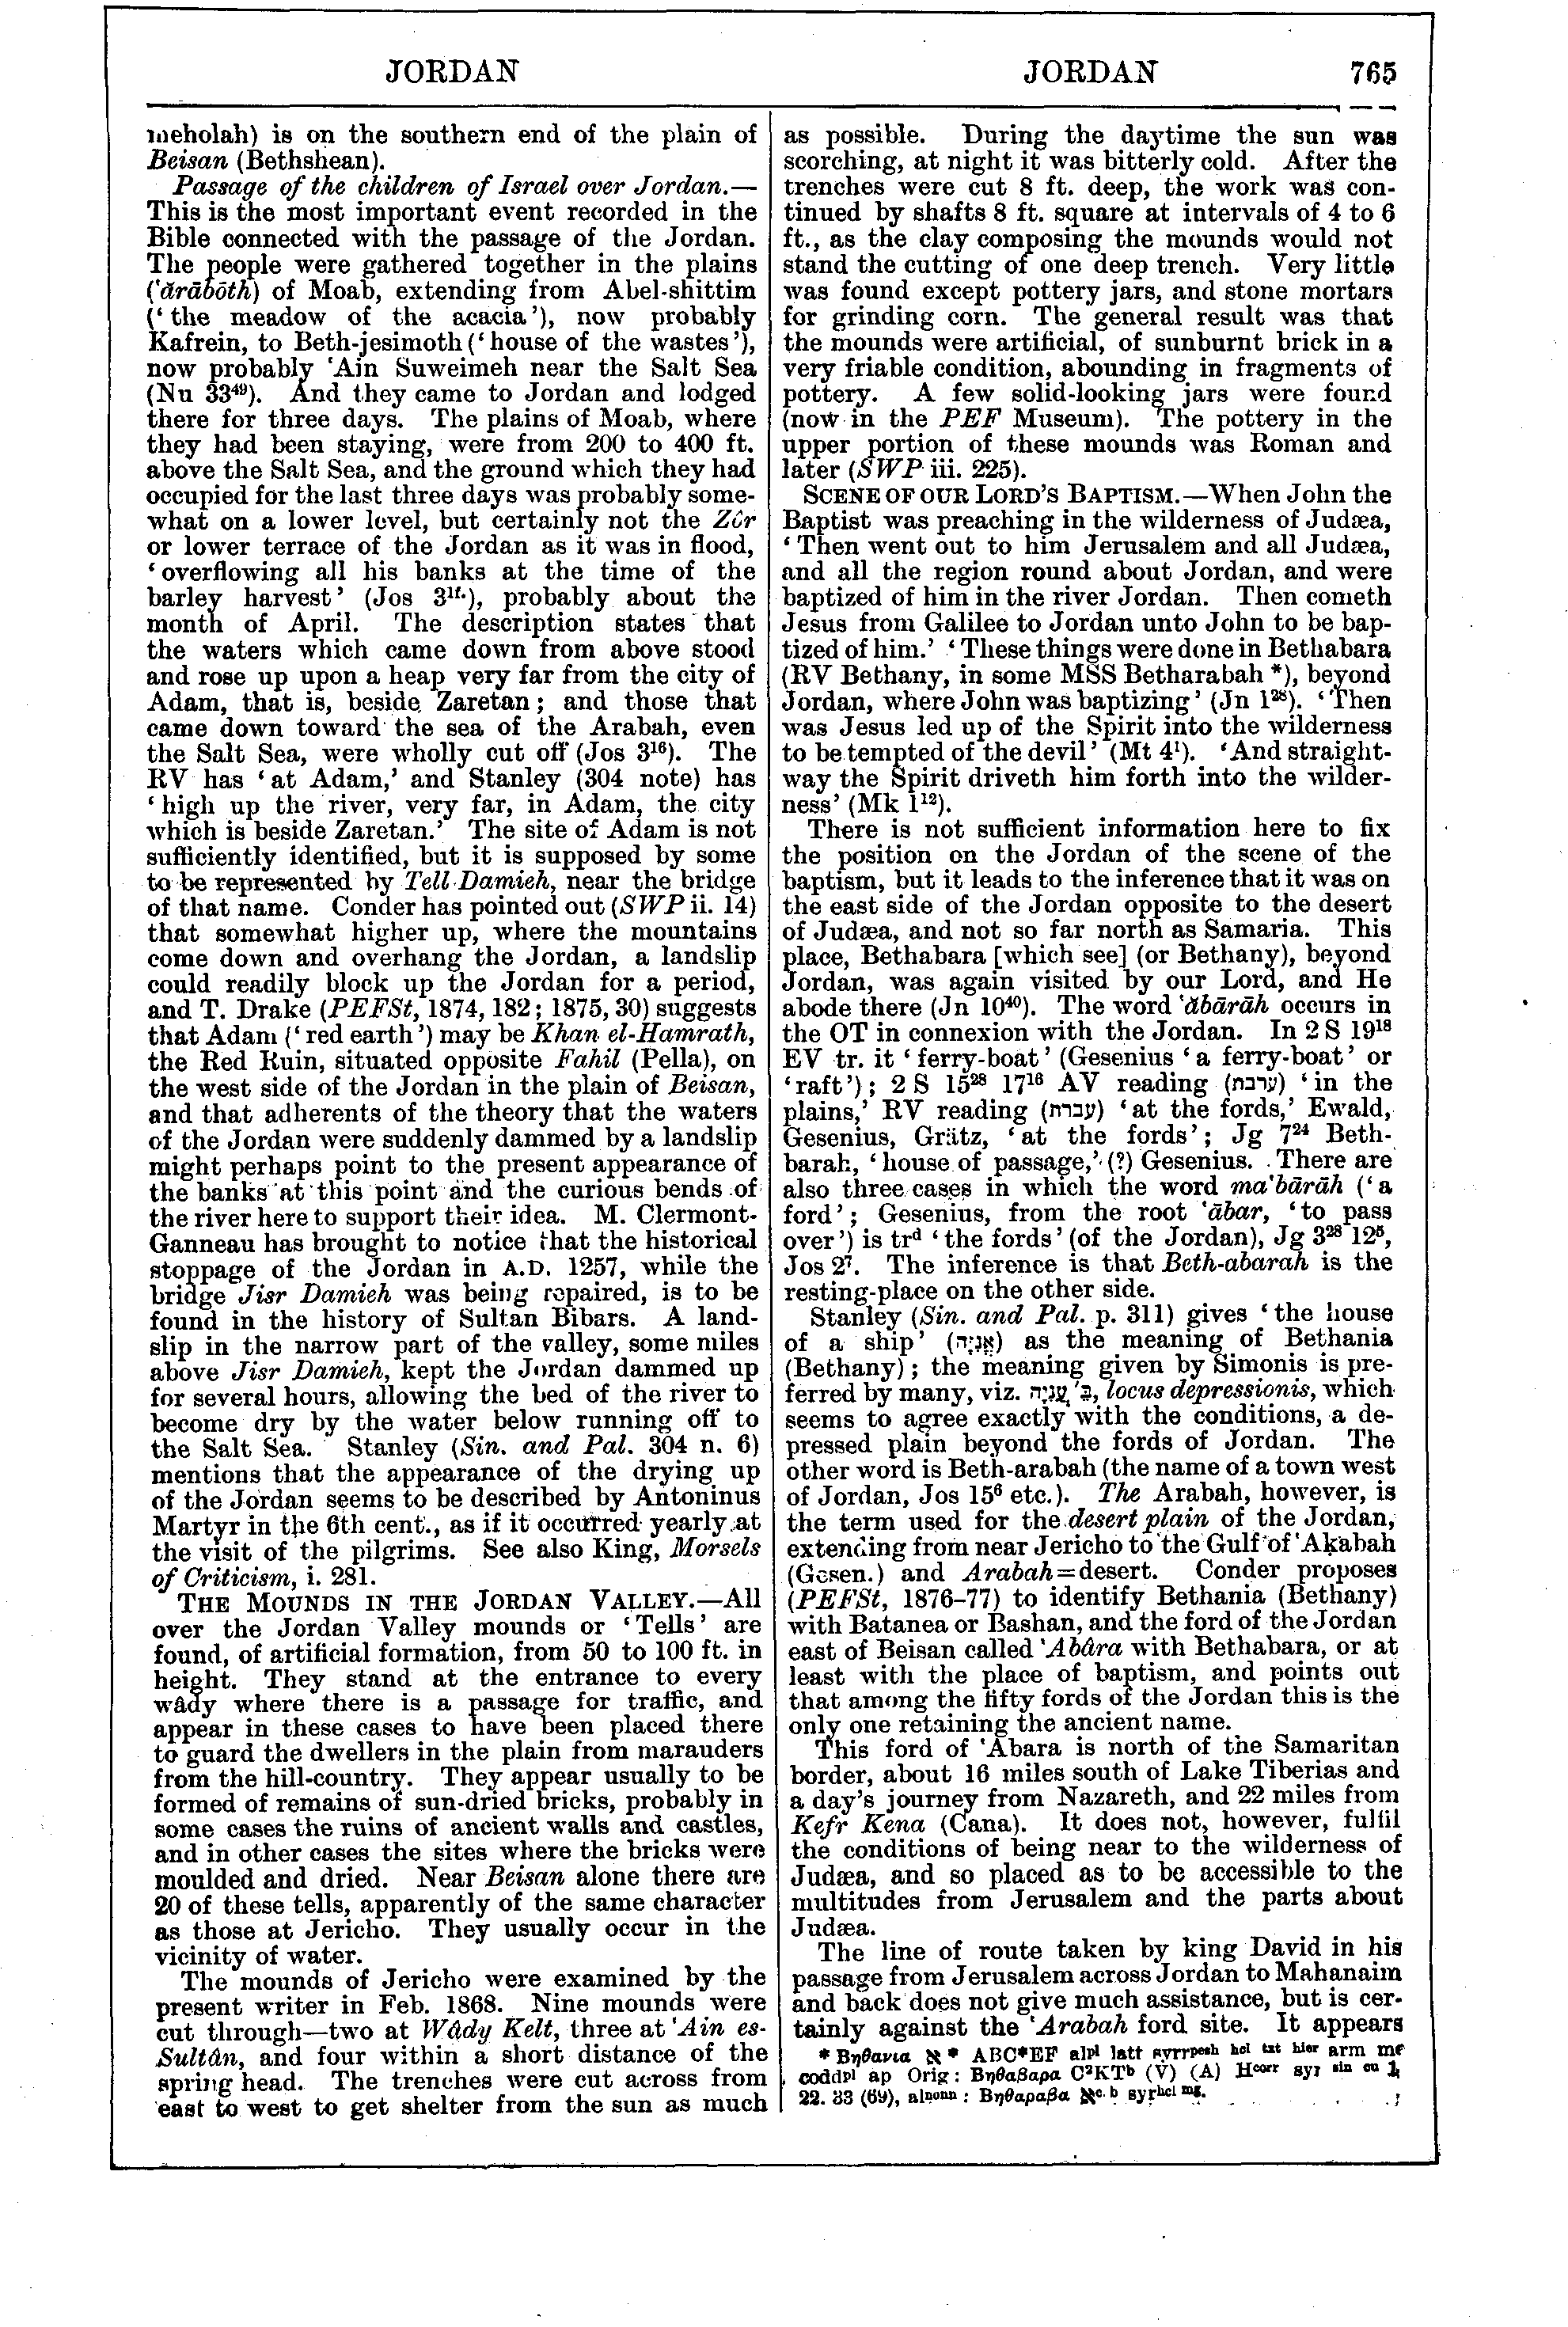 Image of page 765